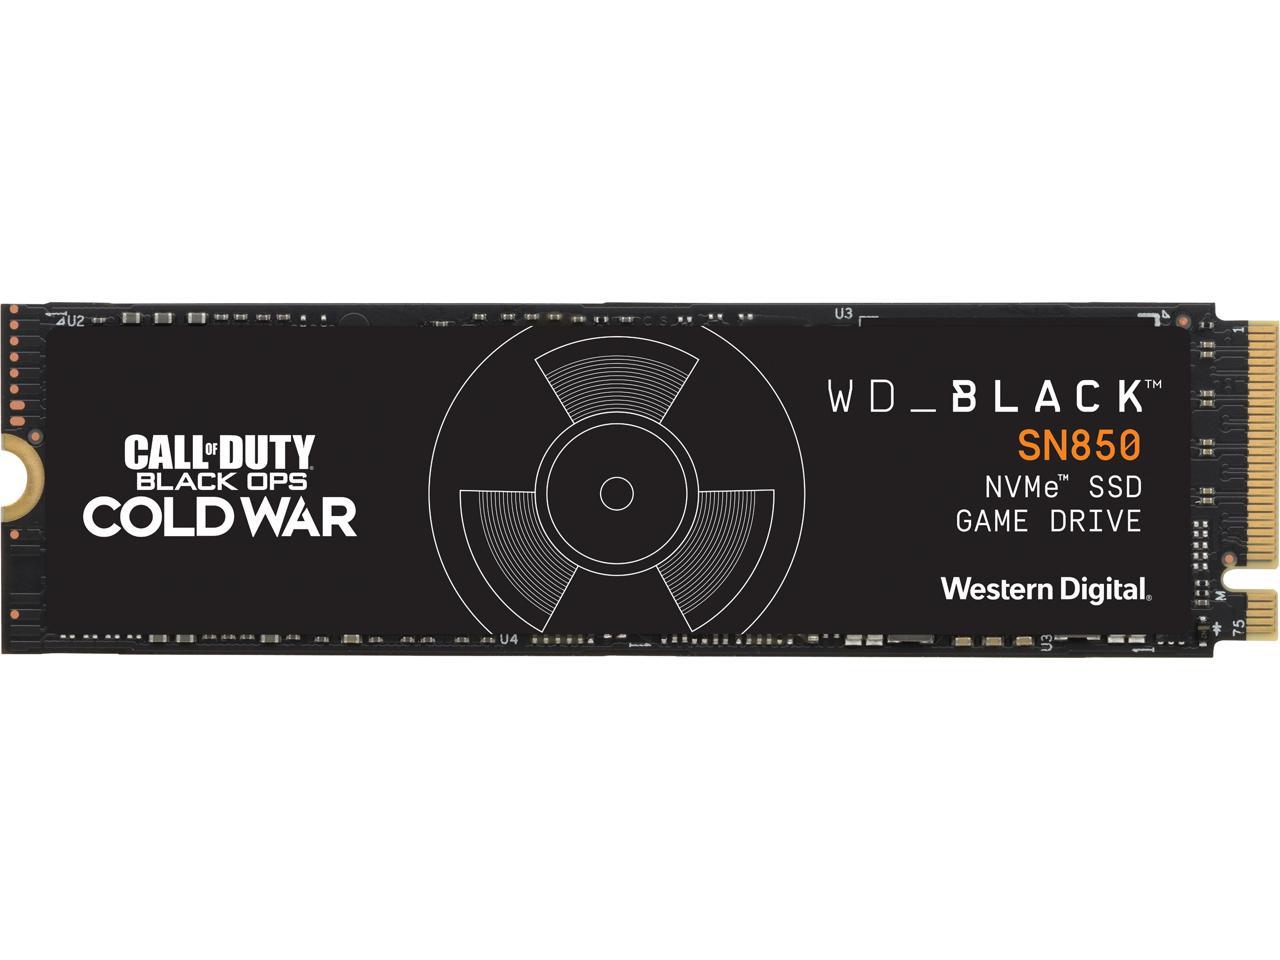 Wd Black Sn850 1tb Nvme Solid State Drive Call Of Duty Black Ops Cold War Special Edition M 2 2280 Pci Express 4 0 X4 3d Nand Internal Solid State Drive Ssd Wdbb2f0010bnc Wrsn Newegg Com